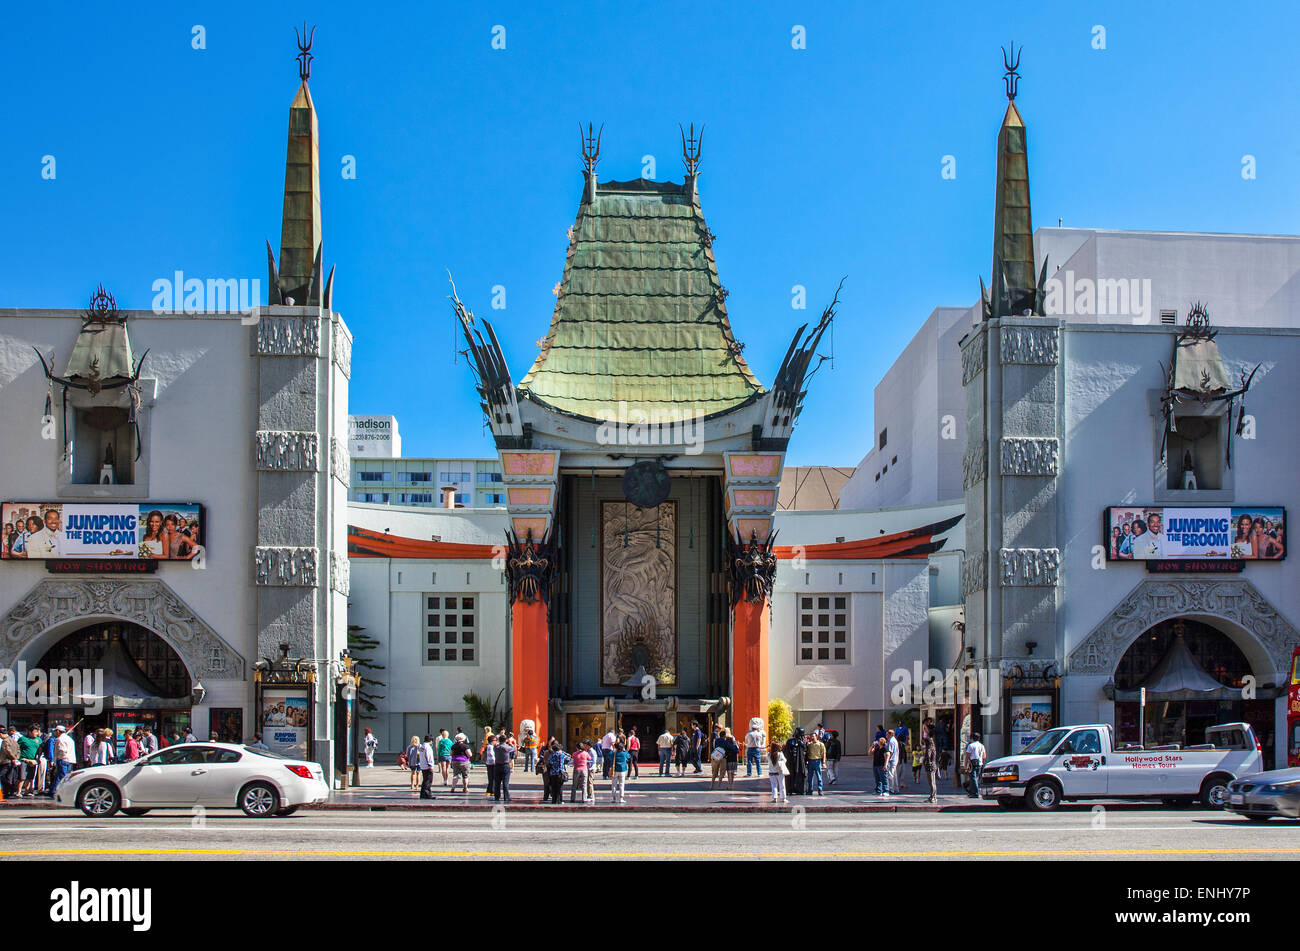 U.S.A., California, Los Angeles, Hollywood, the Grauman's Chinese Theatre Stock Photo